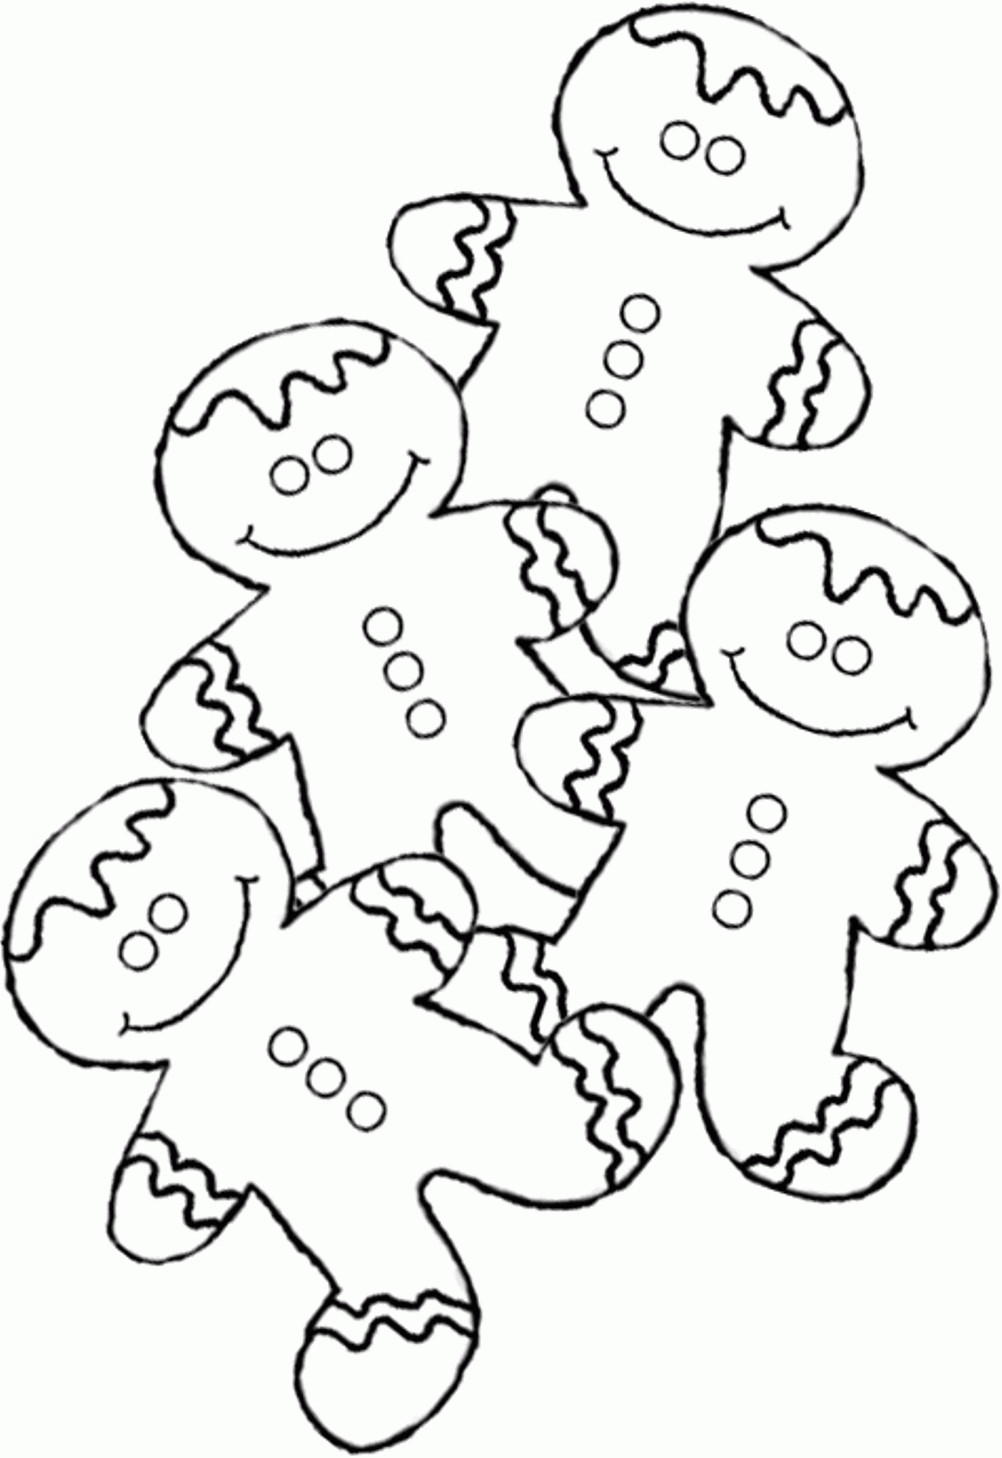 Gingerbread Boy And Girl Coloring Pages
 Gingerbread Boy And Girl Coloring Pages AZ Coloring Pages